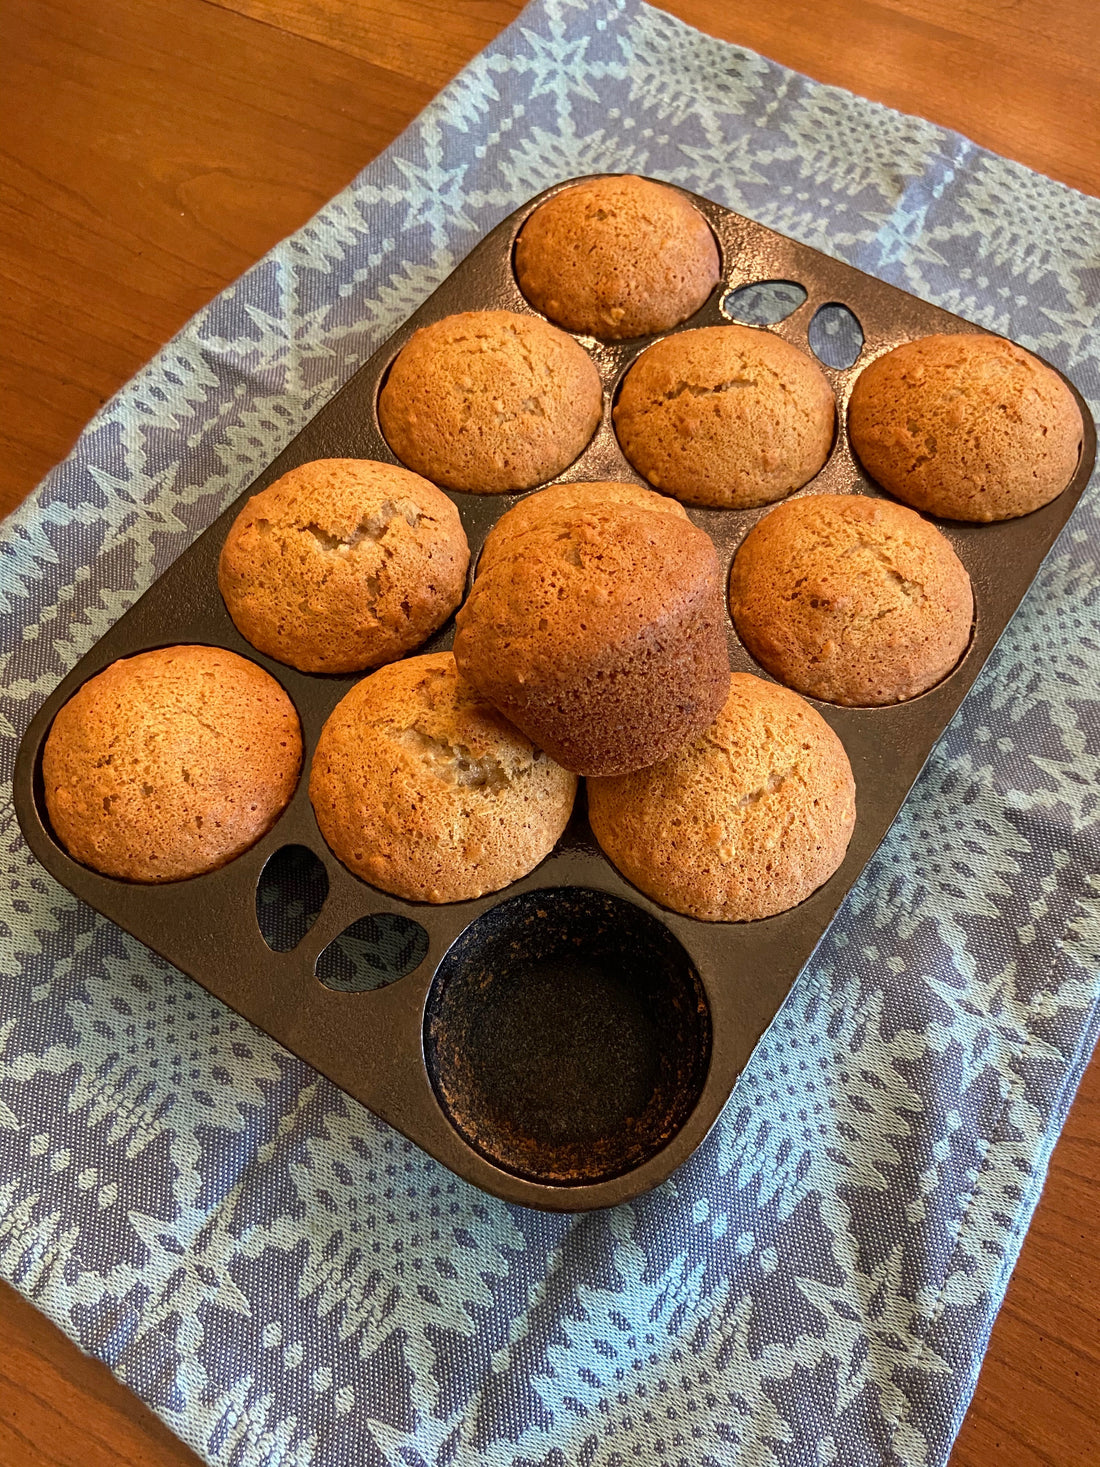 Banana nut muffins in cast iron pan including recipe by Crisbee